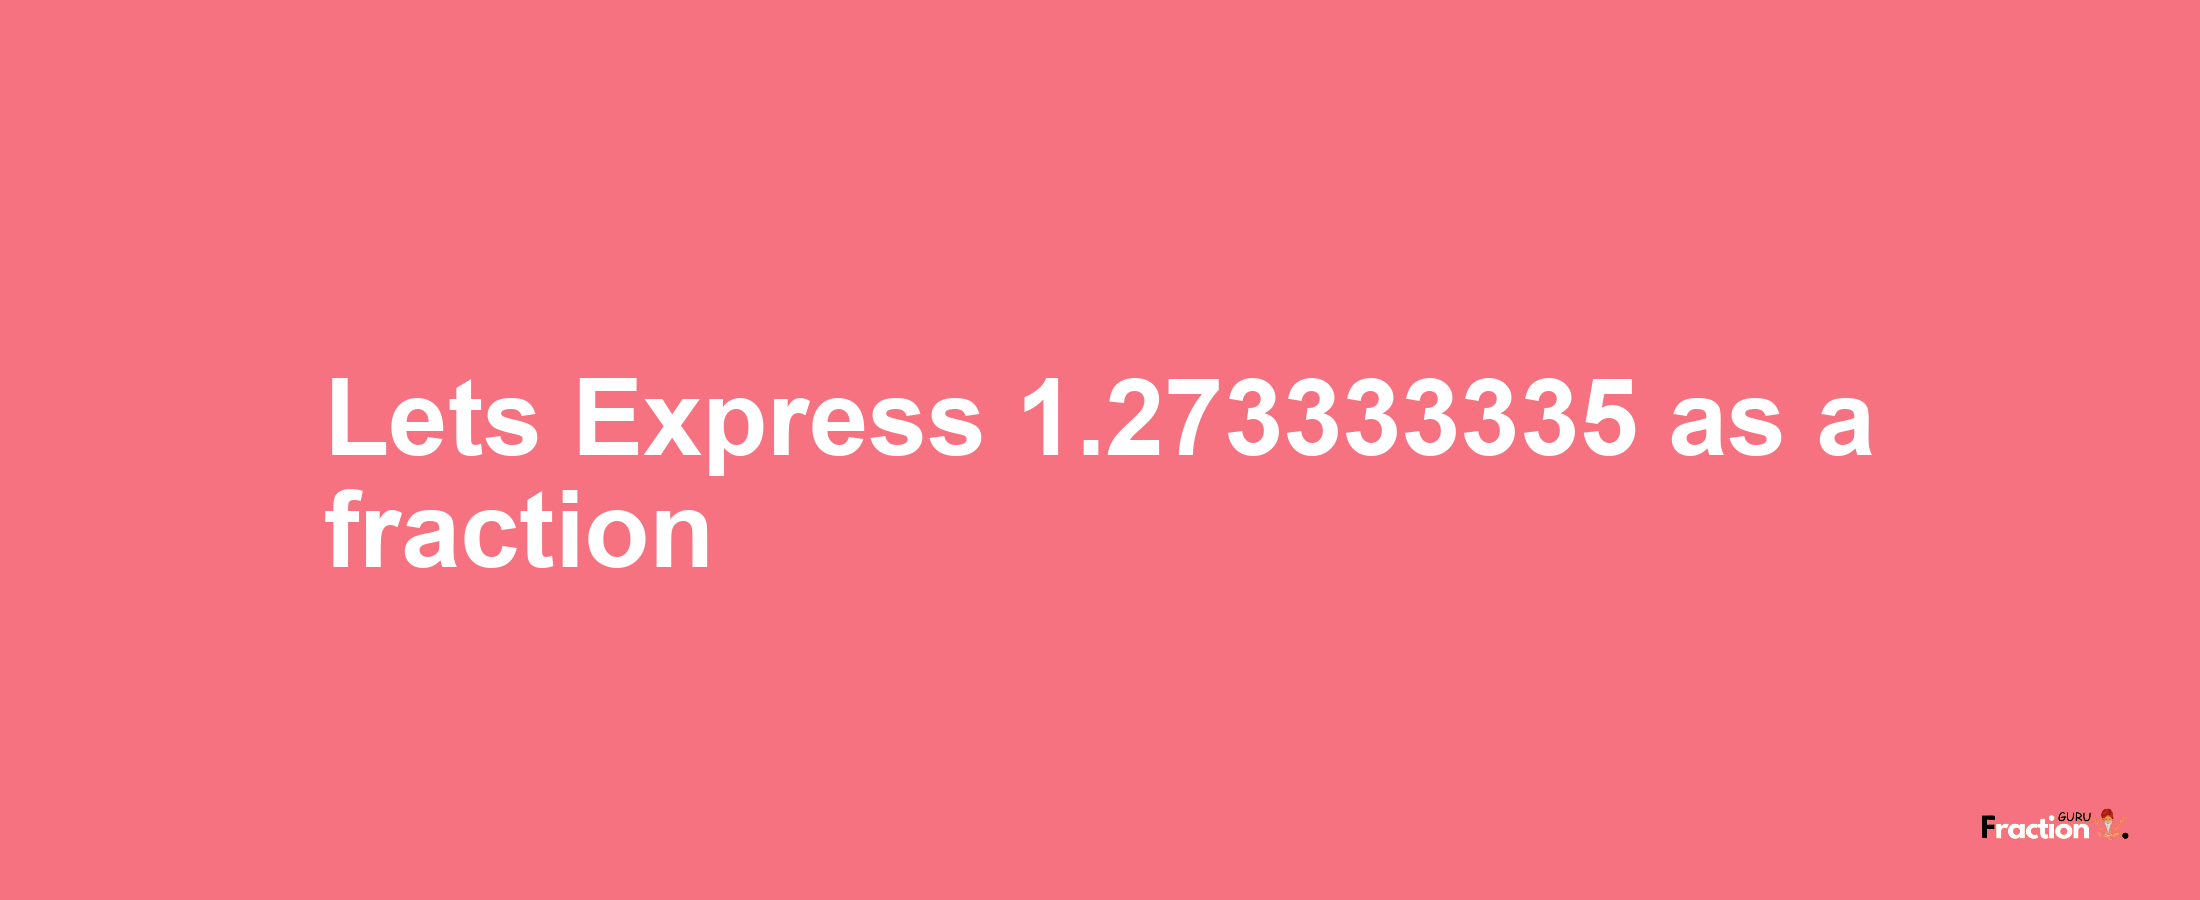 Lets Express 1.273333335 as afraction